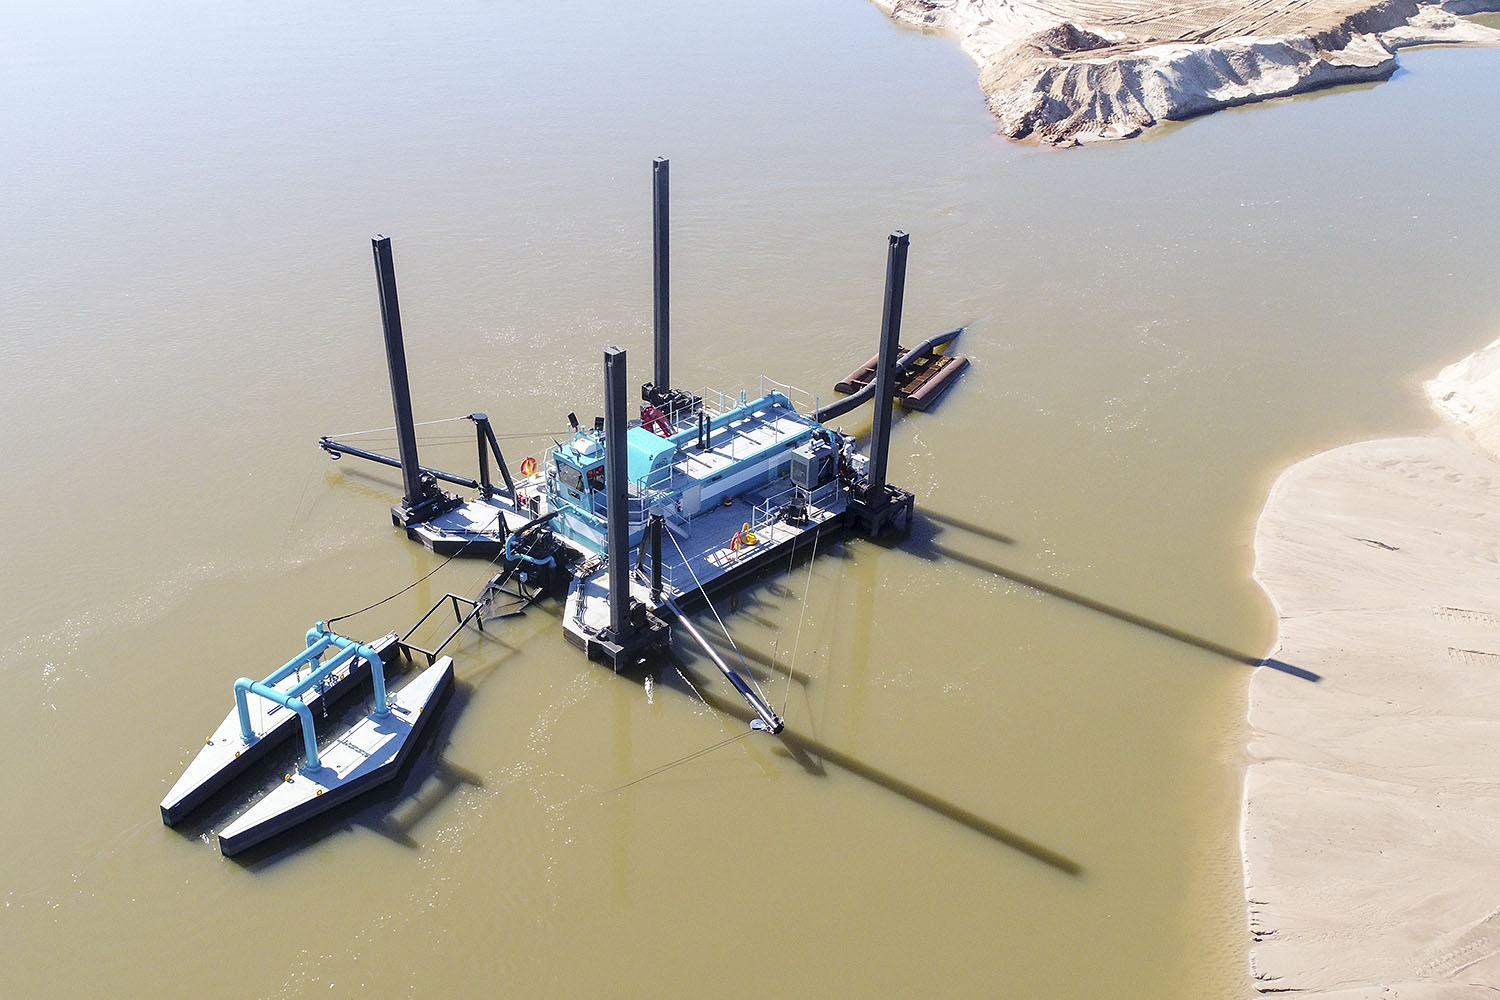 DSC Dredge’s new cutter suction dredge design, called the “Sharkuda,” is a wide format swinging ladder dredge that features a spud glider system that allows the unit to move while continuing to dredge.